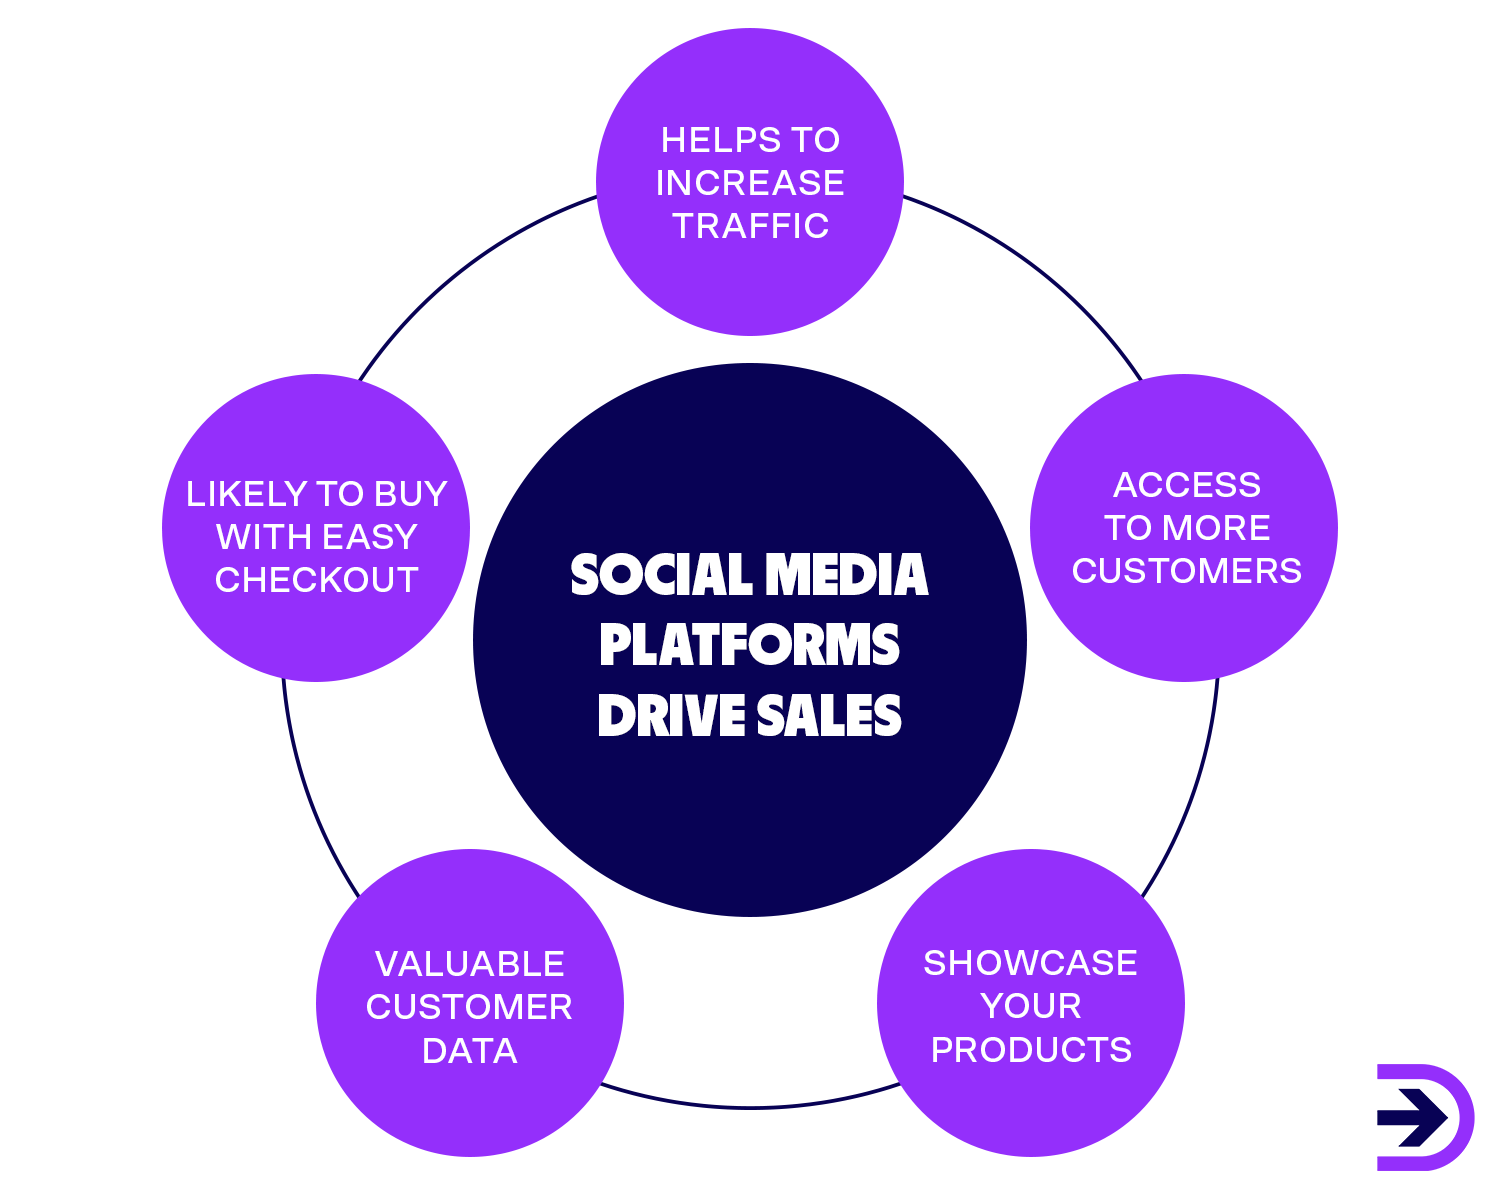 Drive your online sales with social media by accessing more customers and increasing your site traffic.